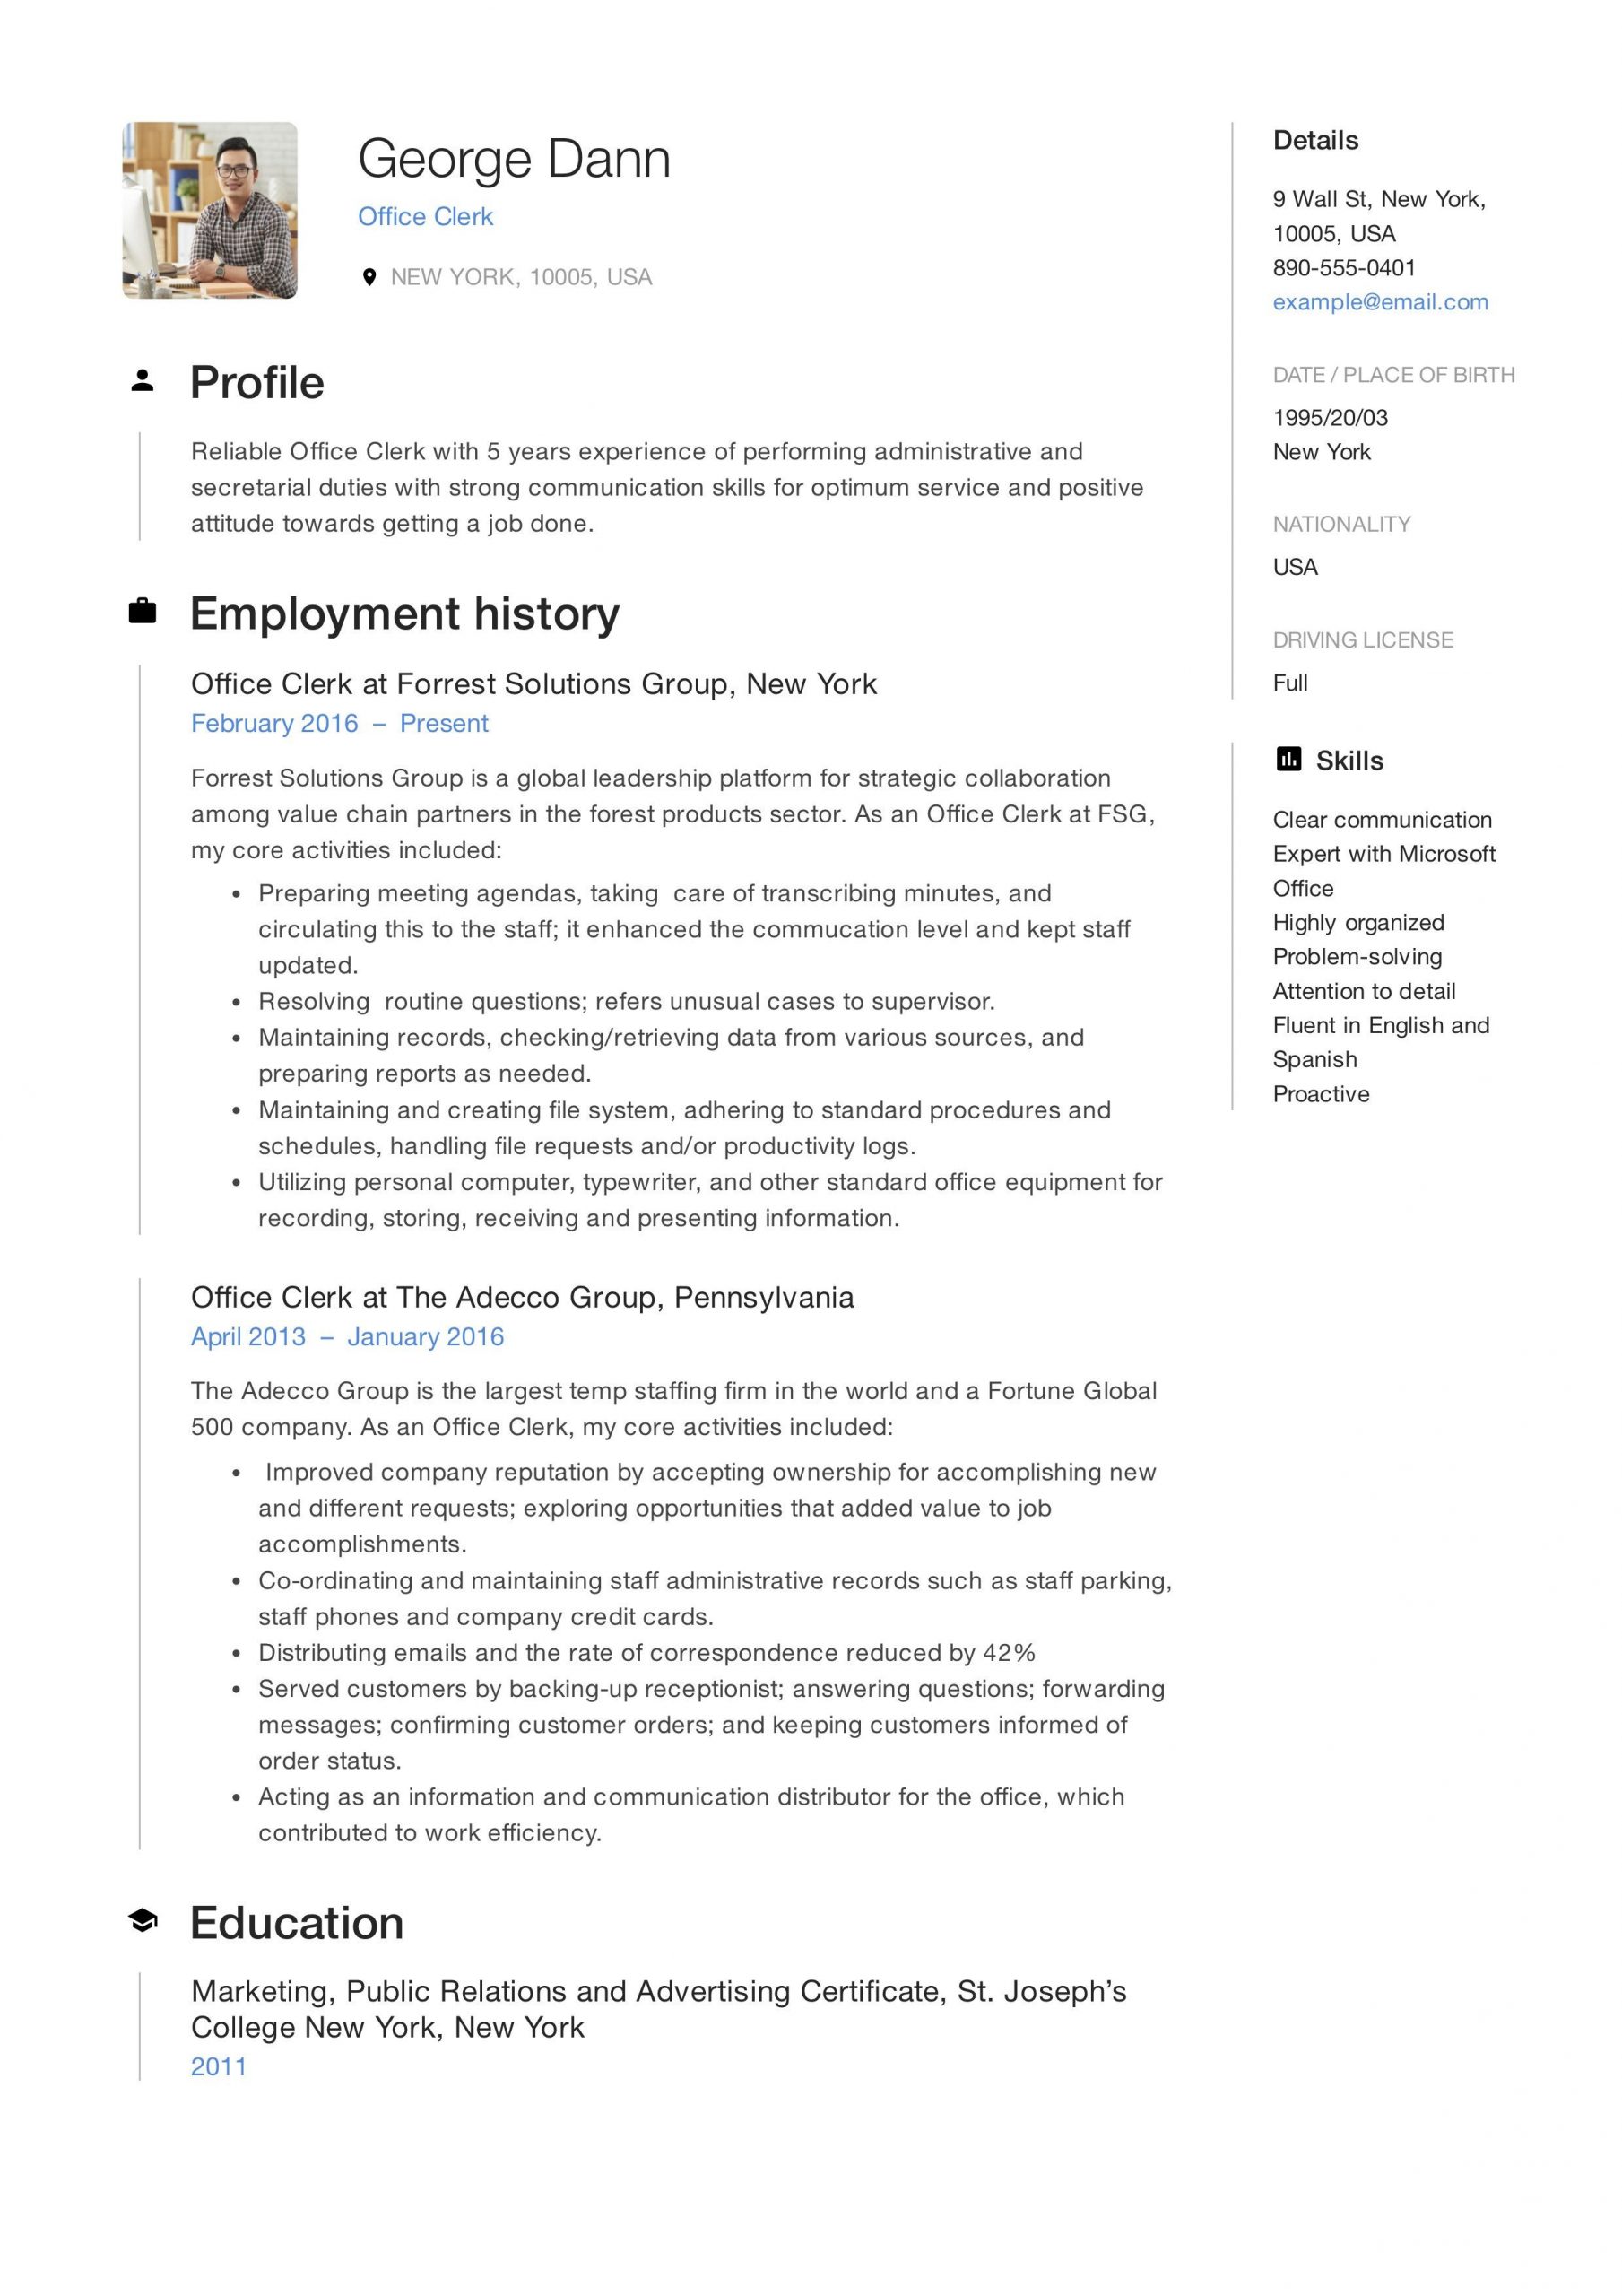 Sample Resume for Clerk with No Experience Office Clerk Resume Resume Guide, Best Resume format, Job Resume …